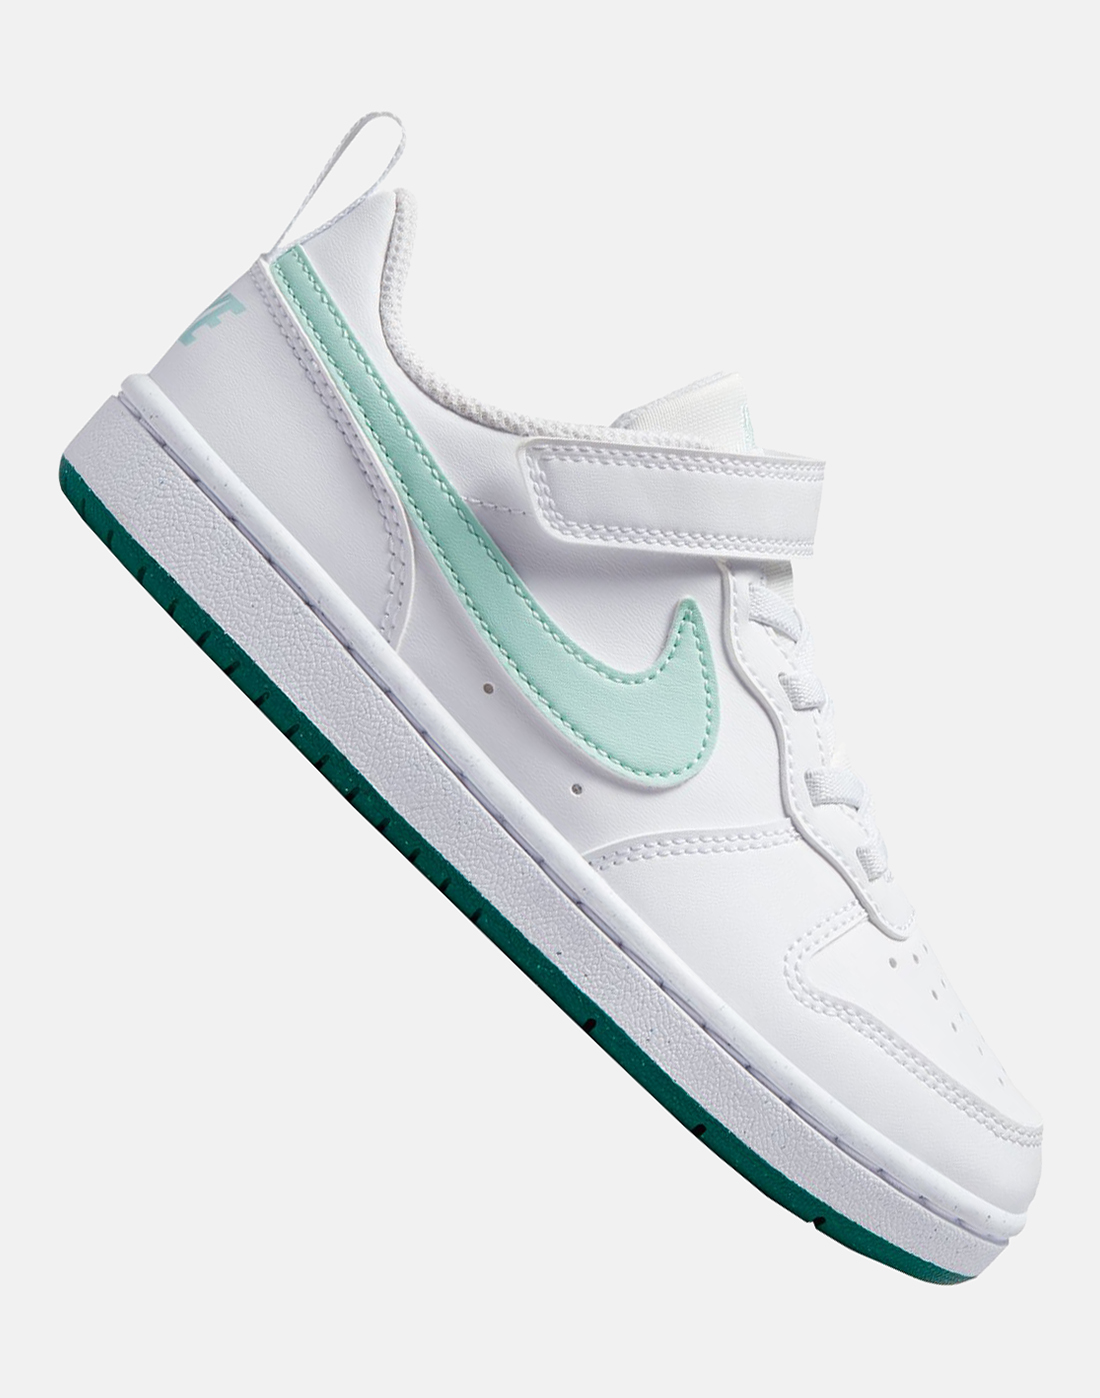 Nike Younger Kids Court Borough Low Recraft - White | Life Style Sports UK